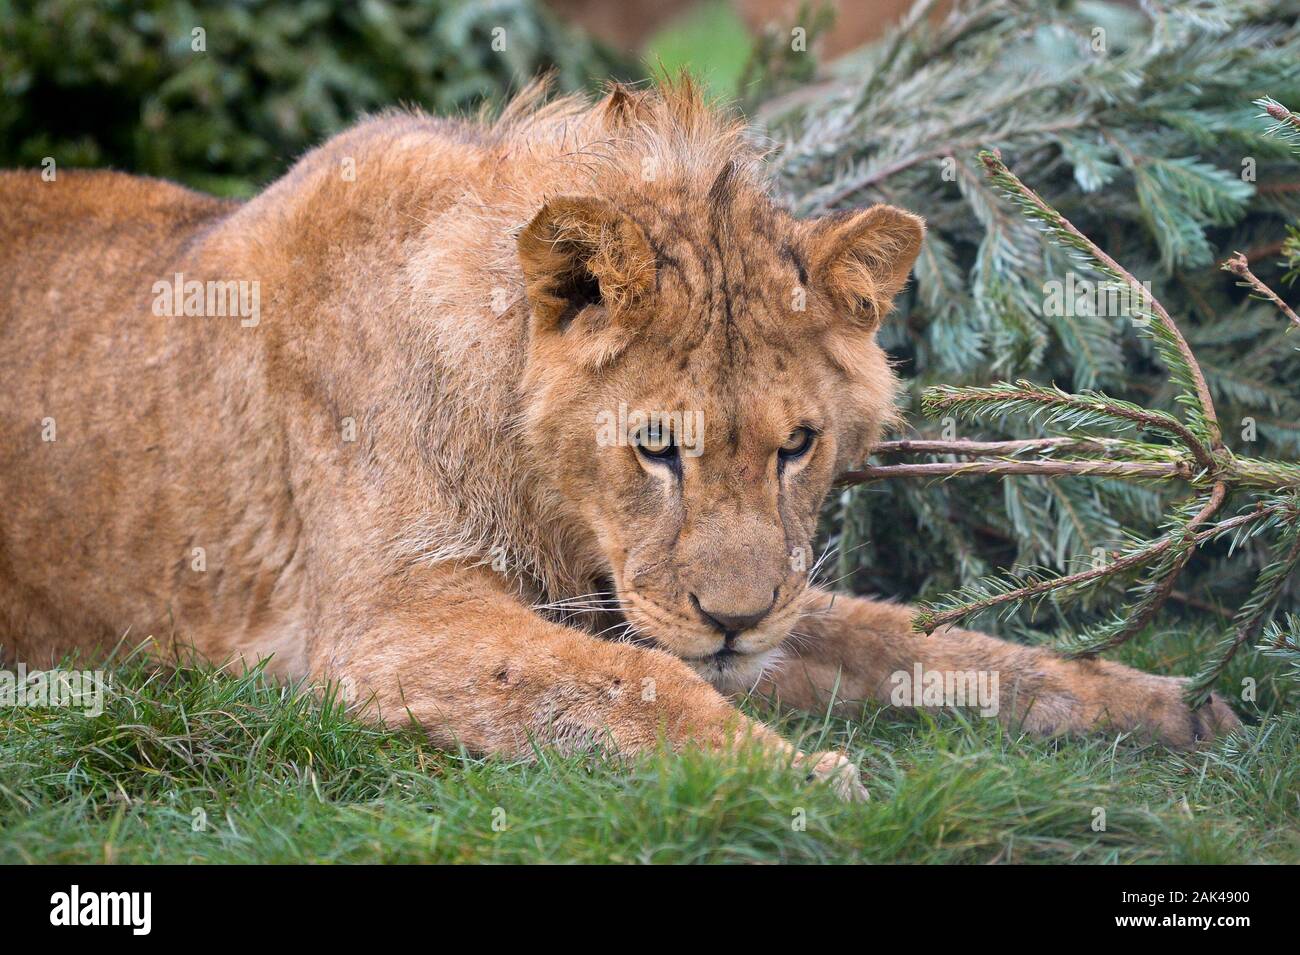 A lion rests by a recycled Christmas tree in the lion enclosure at Noah's Ark Zoo Farm, Wraxall, Somerset, where people are encouraged to donate their old Christmas trees to be used for the zoo animals enrichment and enjoyment. Stock Photo